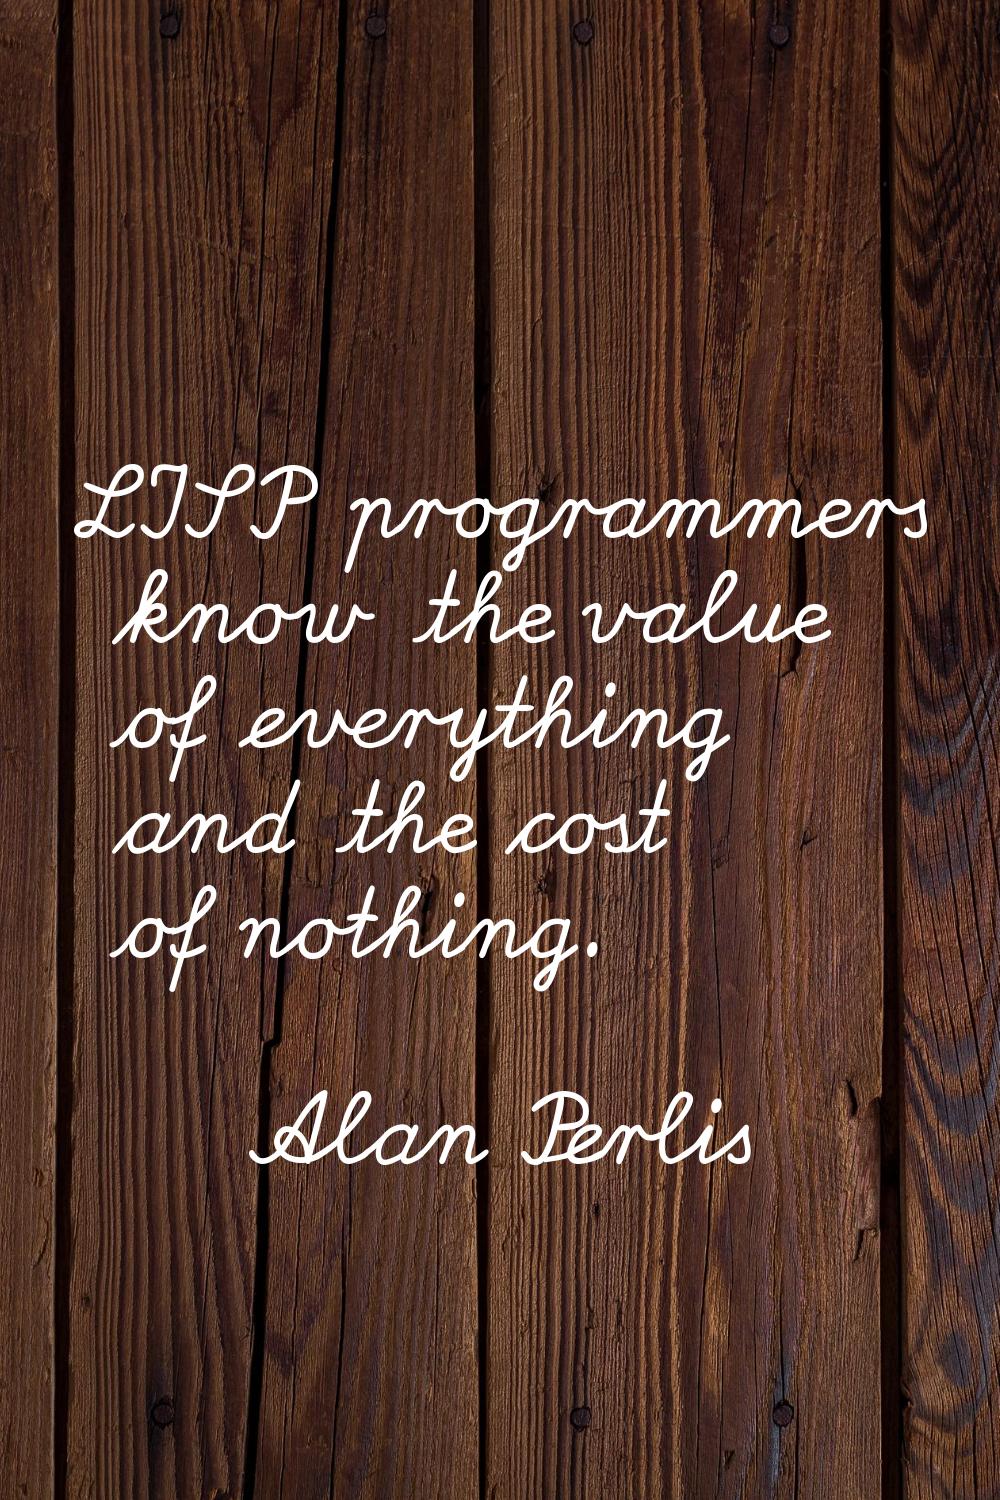 LISP programmers know the value of everything and the cost of nothing.